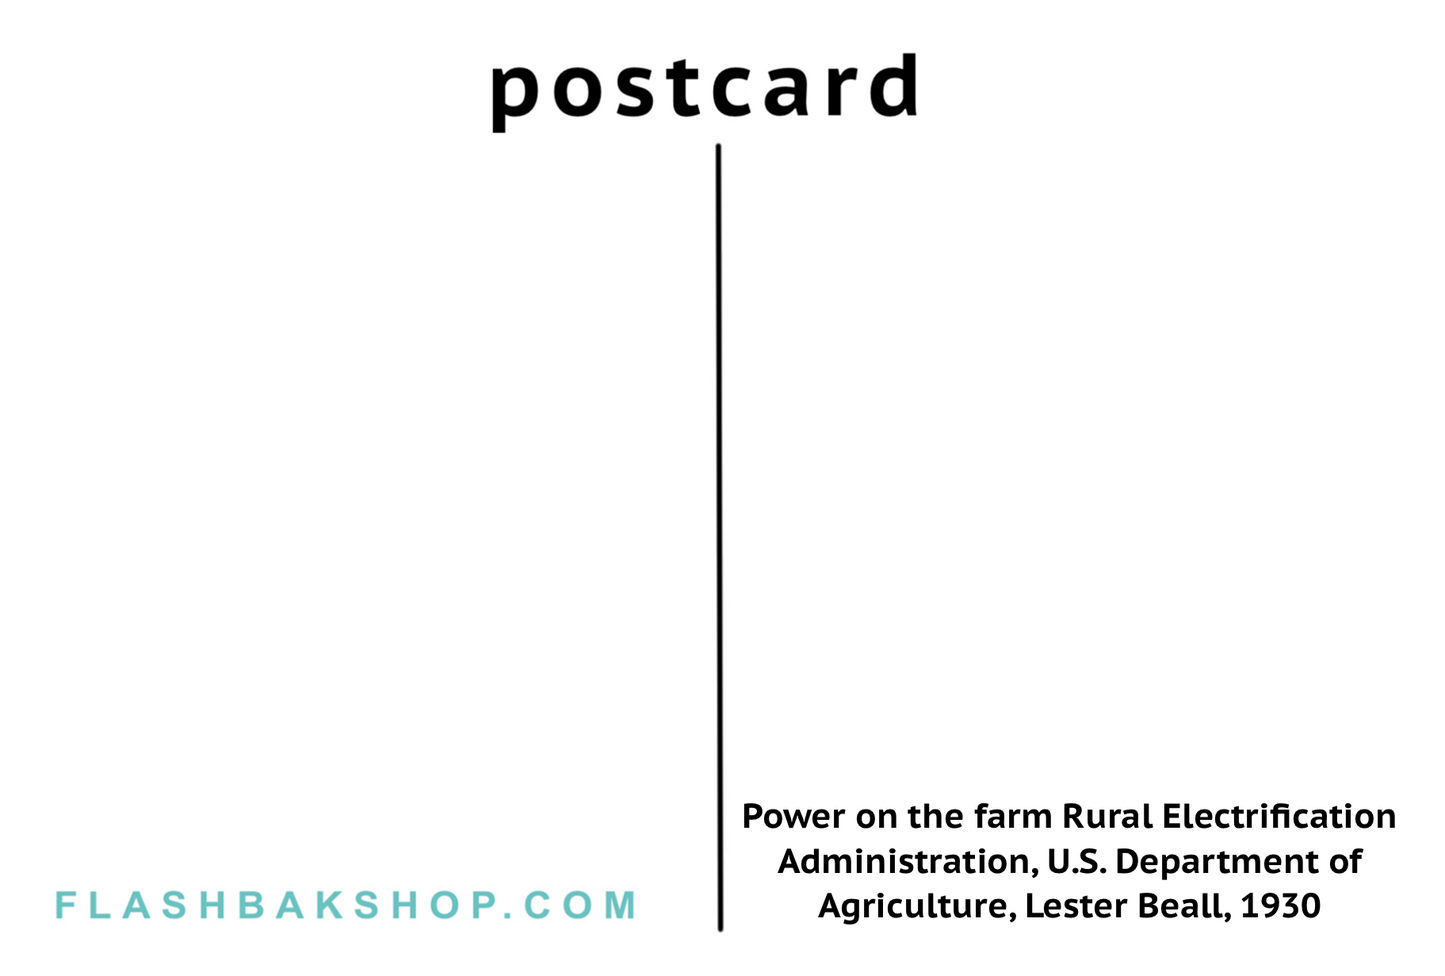 Power on the Farm, Rural Electrification Administration, U.S. Department of Agriculture by Lester Beall, 1930 - Postcard